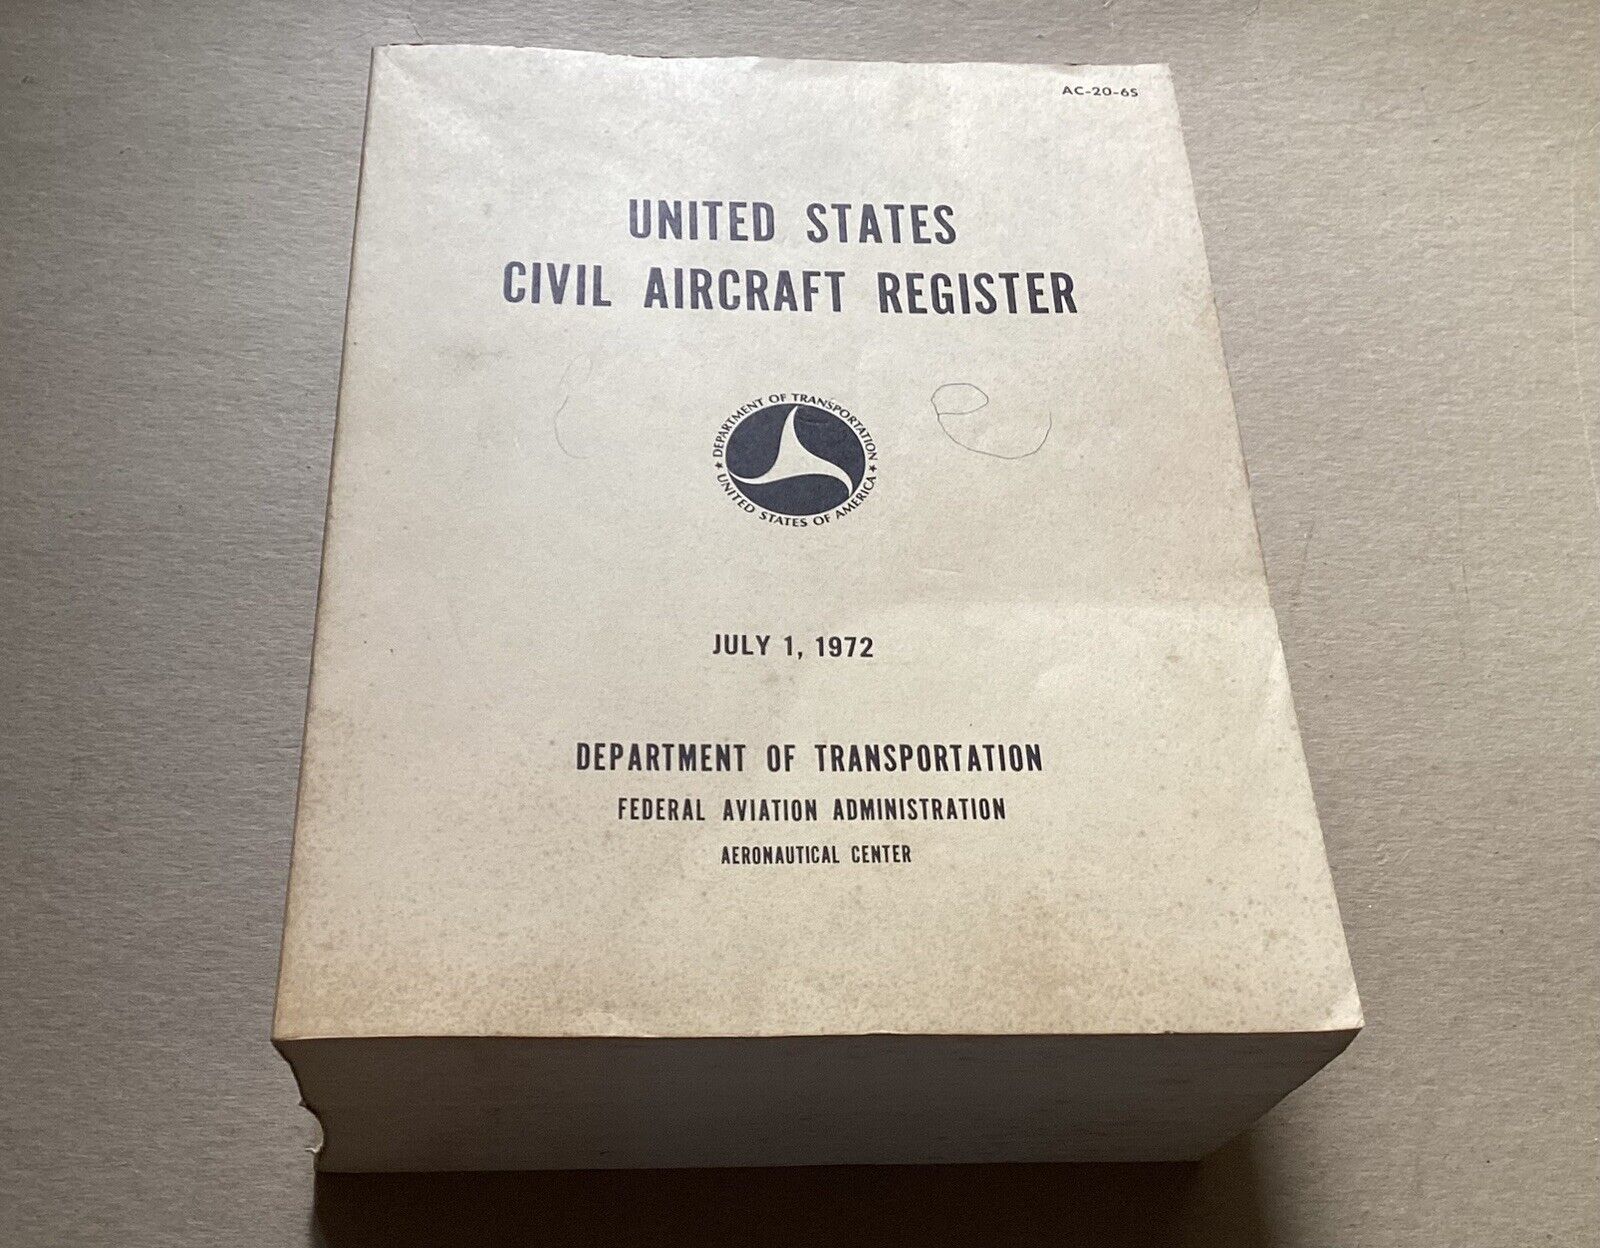 VTG Rare 1972 United States Civil Aircraft Register Book, 1615 Pages, Heavy